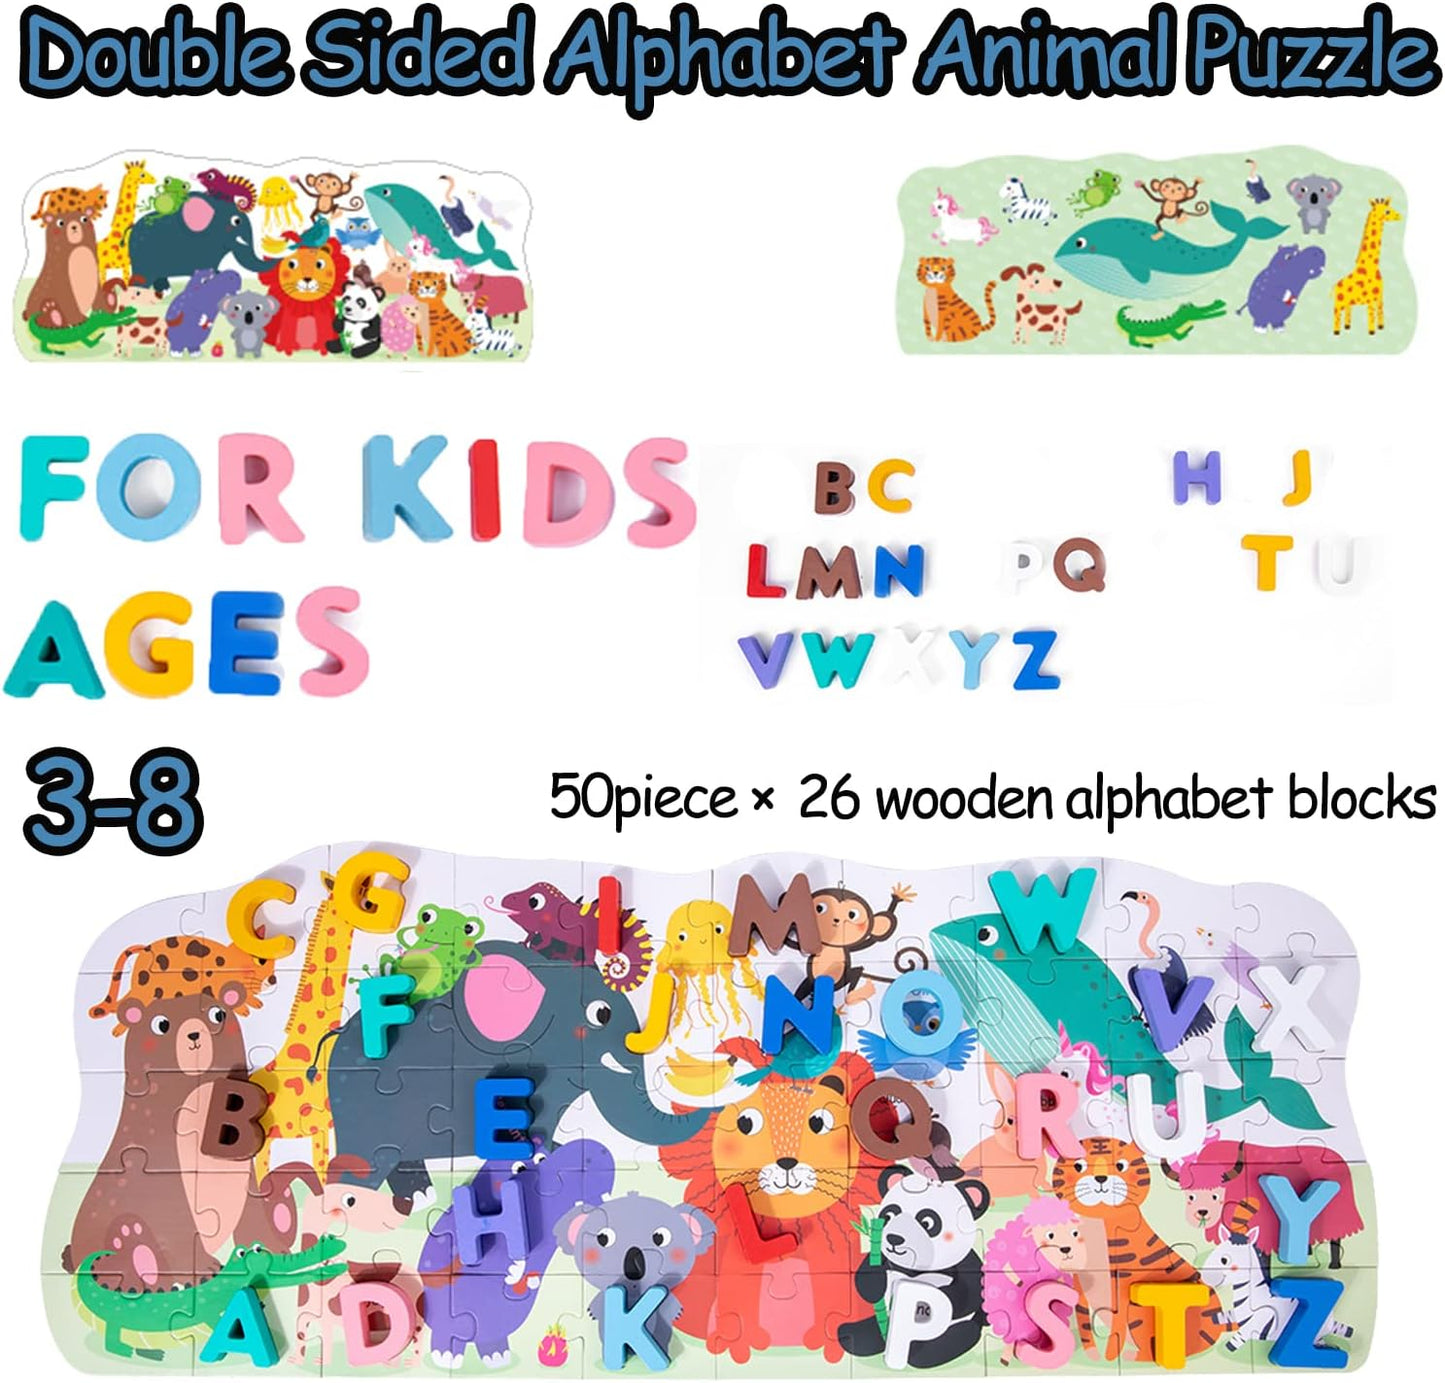 Number Animal Puzzles for Kids Ages 3-5 10 Pack Wooden Jigsaw Puzzles 55 Piece Floor Puzzle for Kids Ages 4-8 Years Old Preschool Educational Learning Gift for Boys and Girls 3,4,5,6,7,8